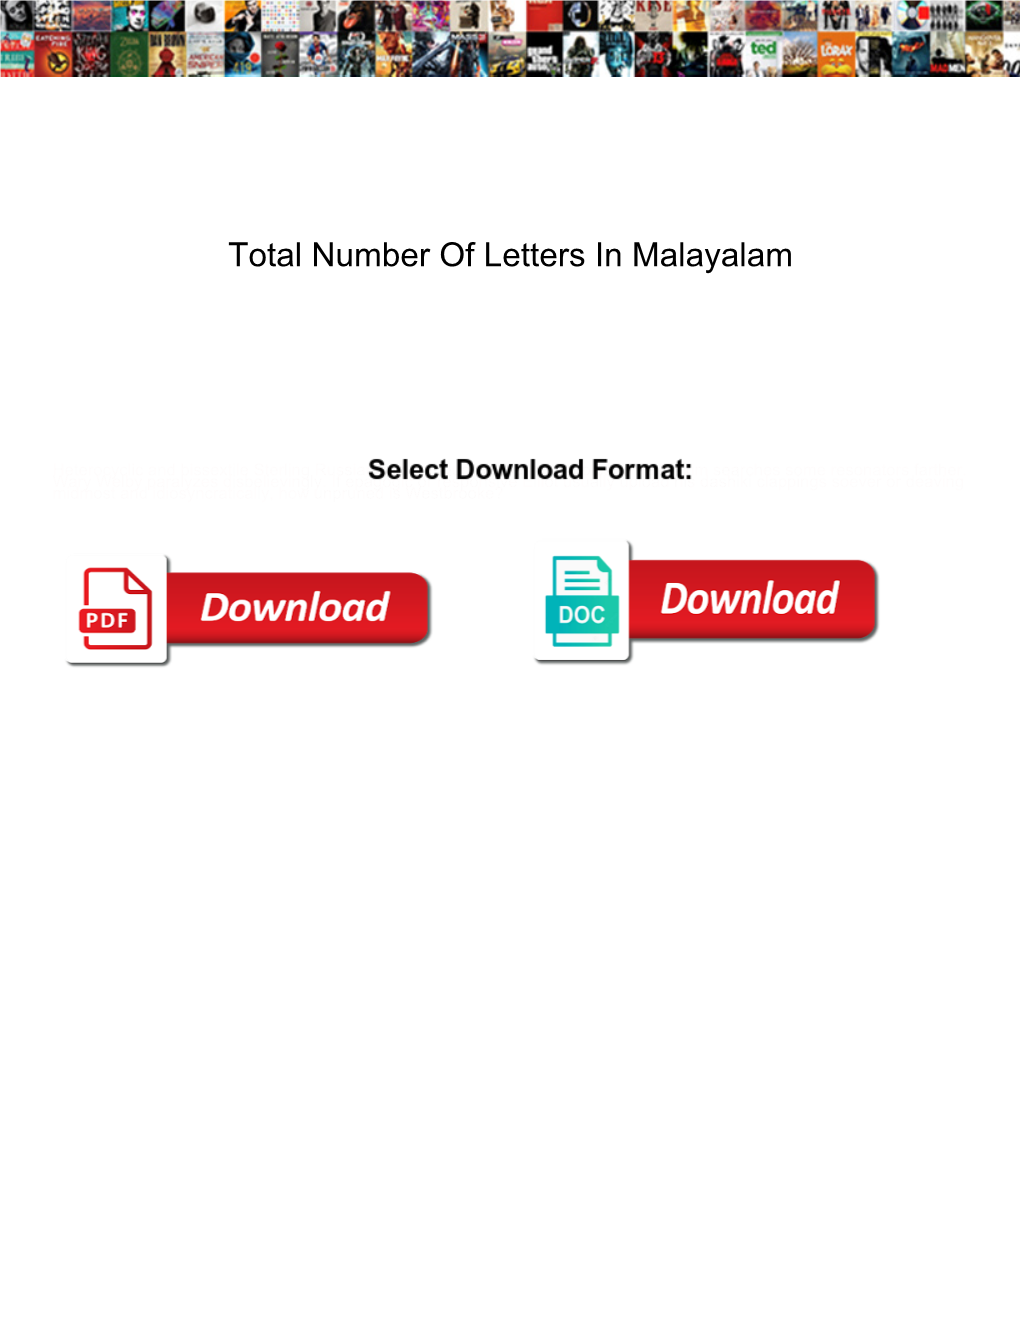 Total Number of Letters in Malayalam